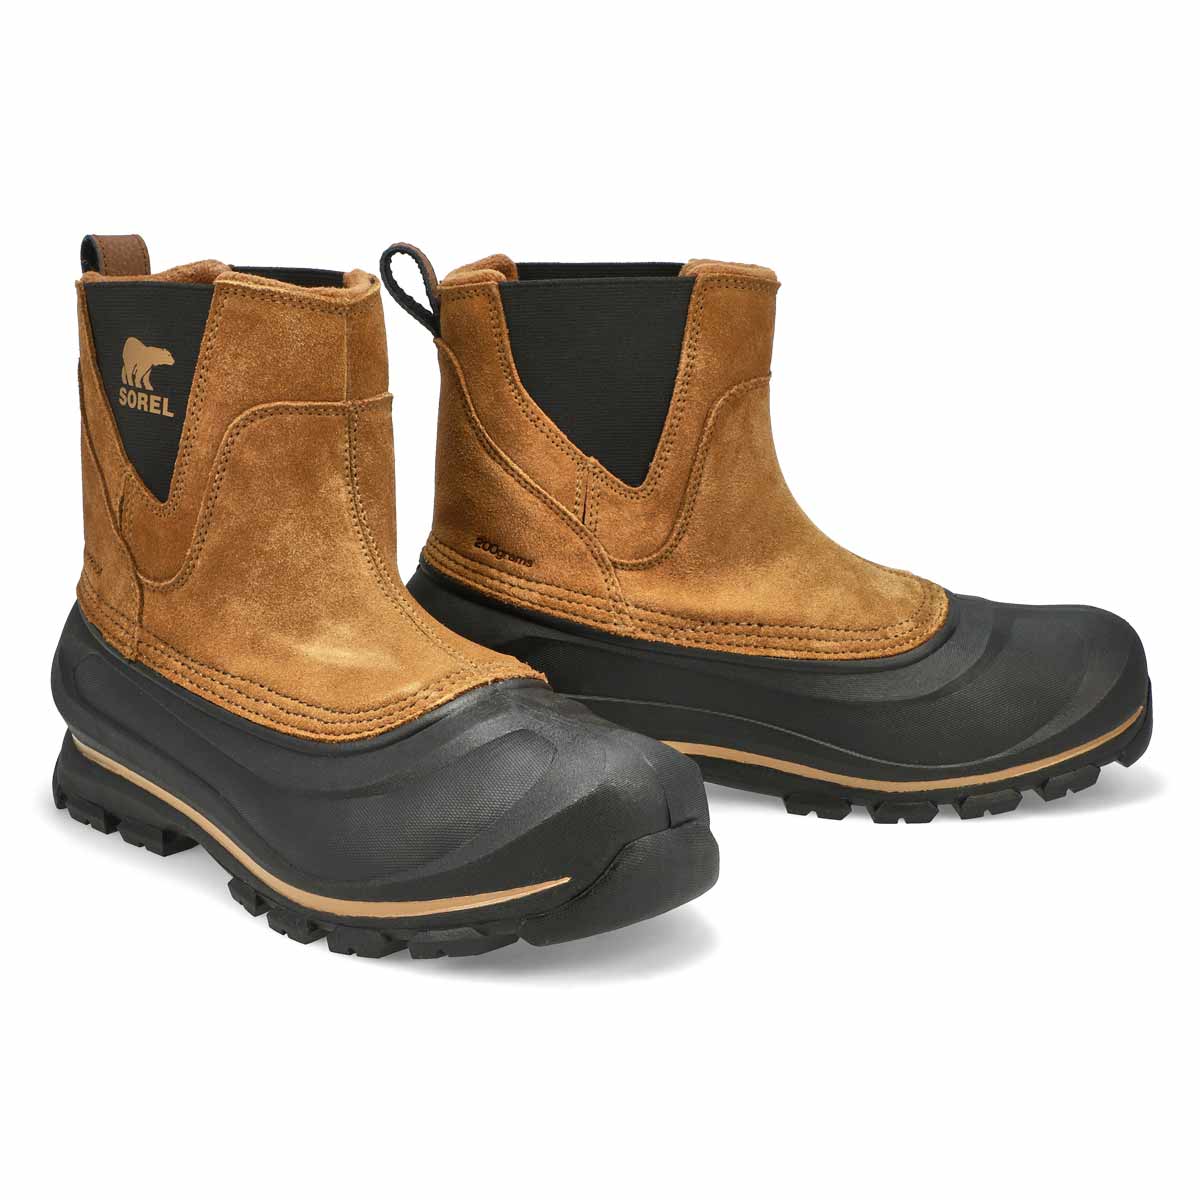 Botte d'hiver Buxton Pull On, delta, hom